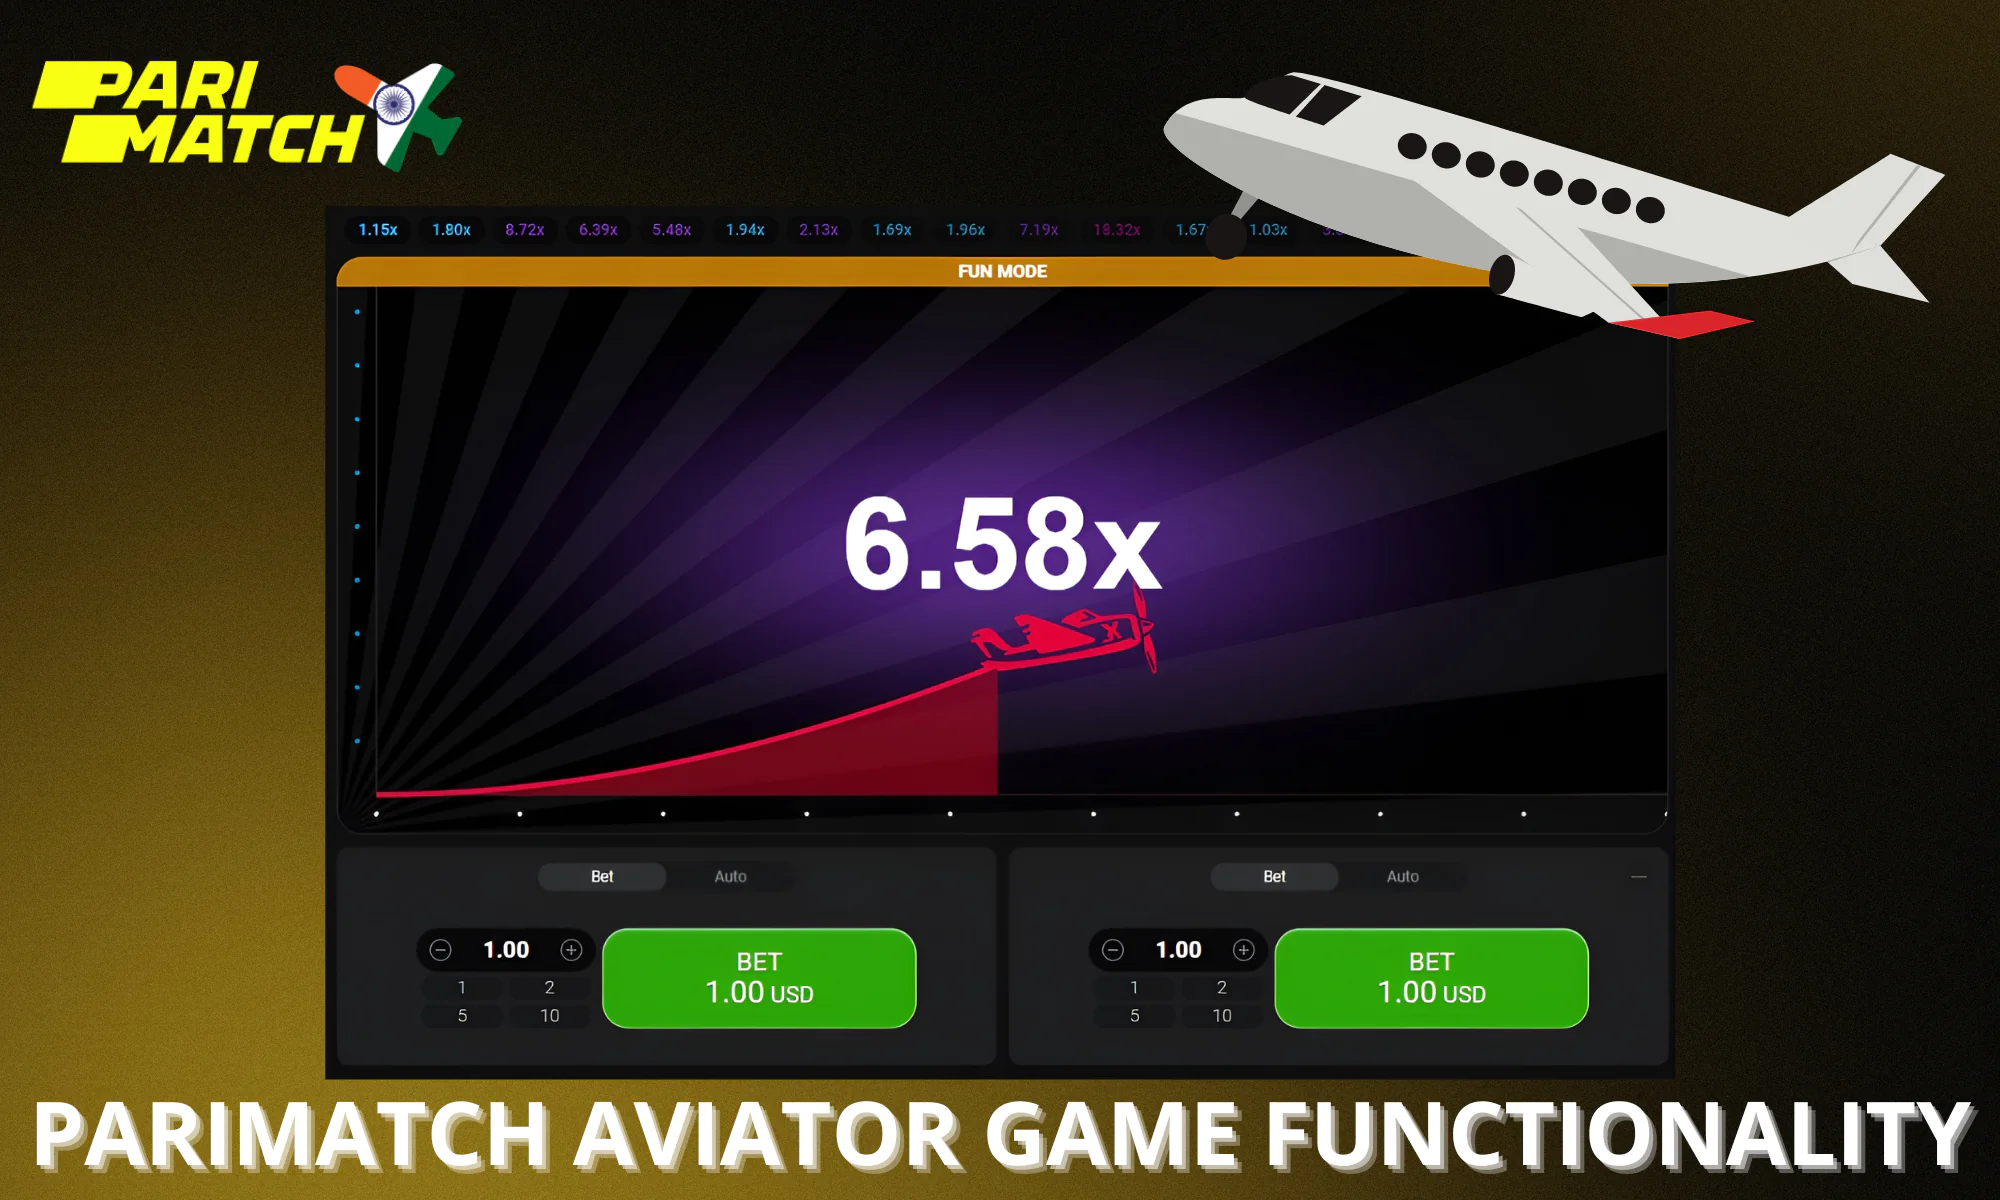 The main functionality of the game Parimatch Aviator that distinguishes it from others